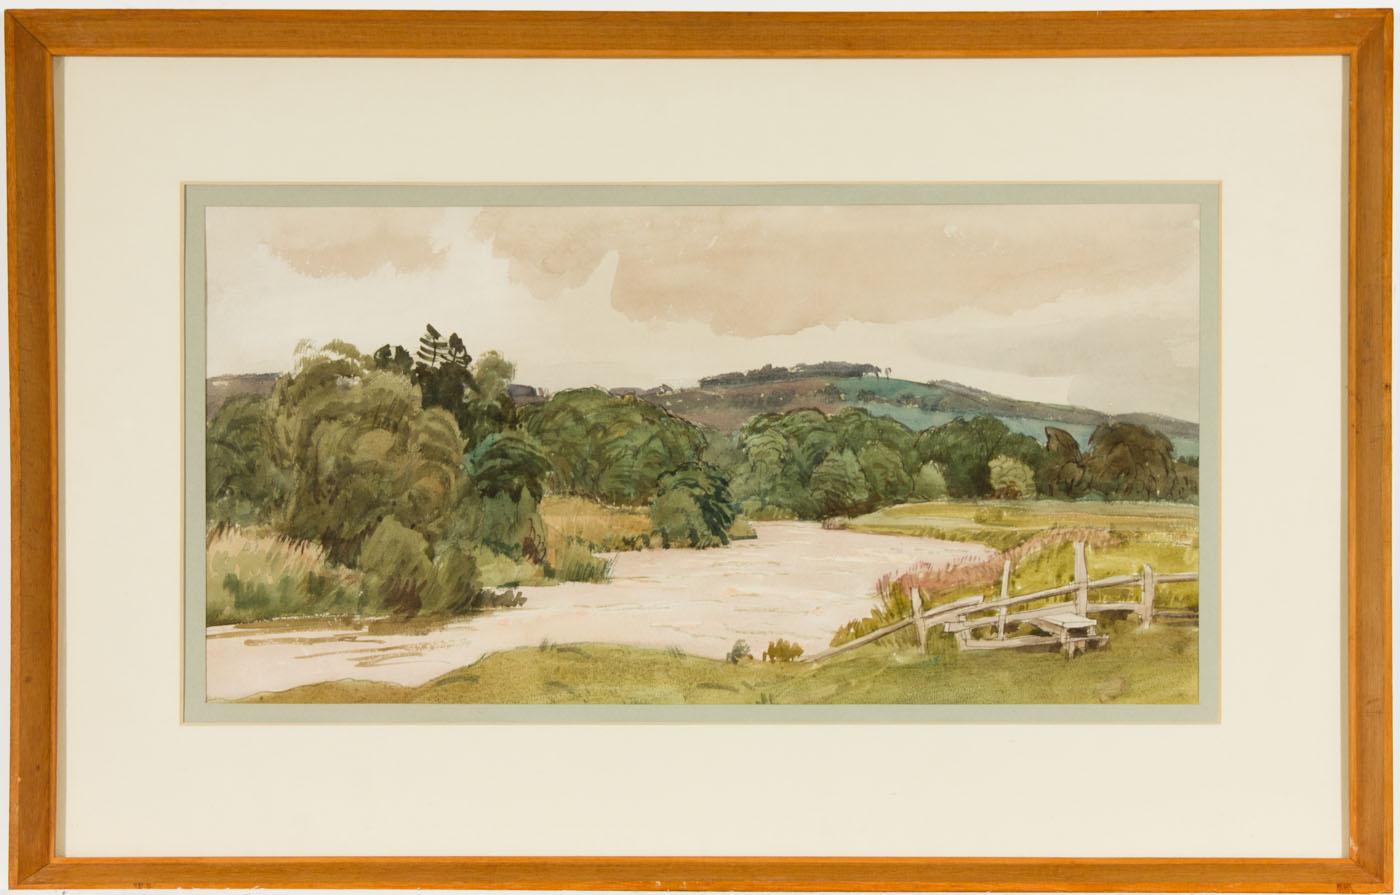 Cedric Kennedy (1898-1963) - Signed, Exhibited Original 1934 Watercolour. This superb watercolour was previously exhibited at the Cheltenham Art Gallery's 'Cedric Kennedy Memorial Exhibition of Paintings', no. 43, 1969. It was also exhibited at